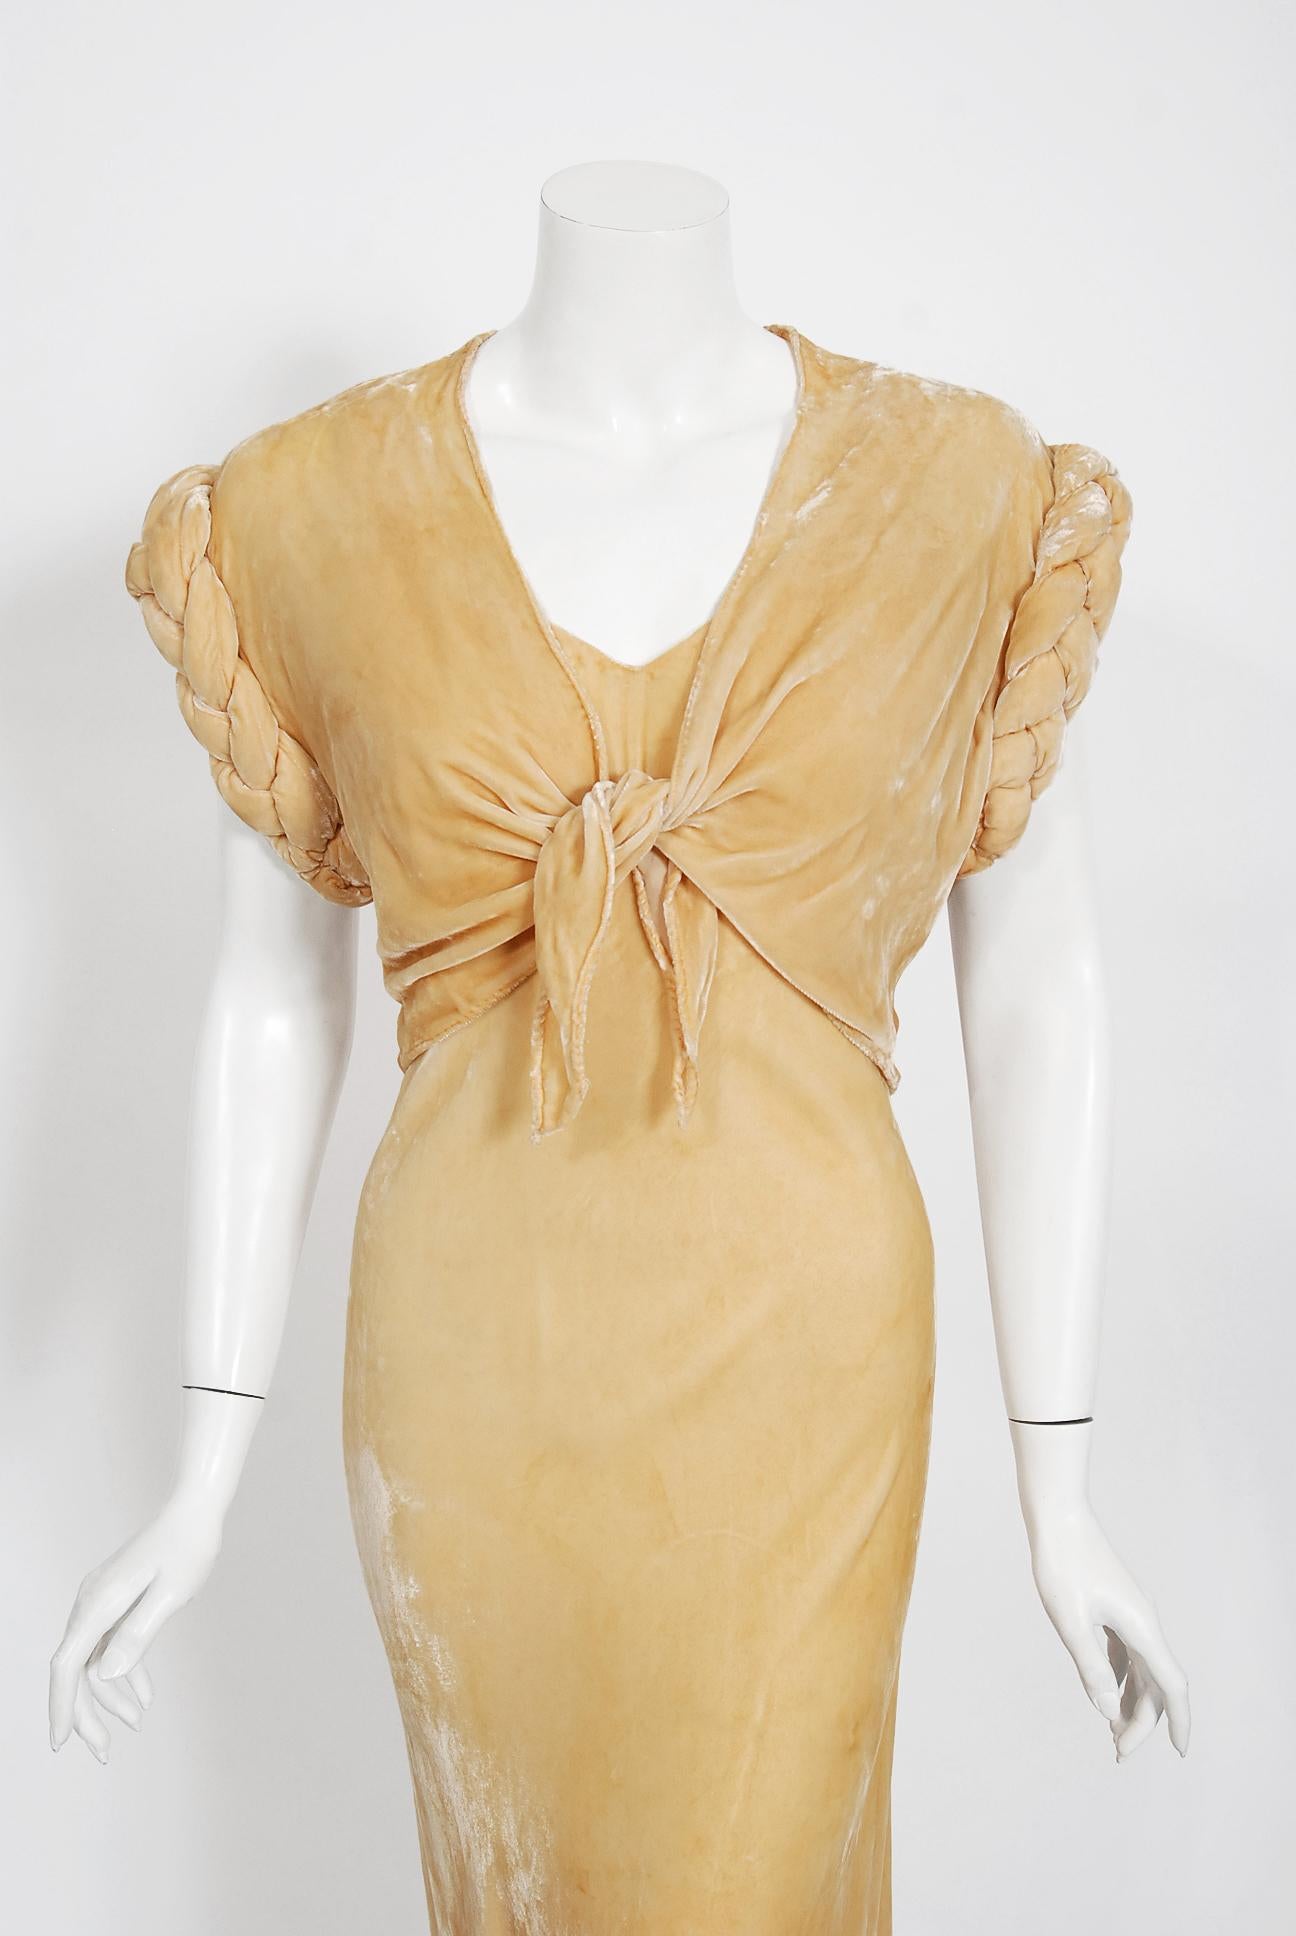 There are lots of lovely 1930's garments still around, but every once in a while I come across one that sets my heart a flutter! This is a simply beautiful 1930's butterscotch colored silk velvet bias-cut gown. Old Hollywood glamour at it's finest.